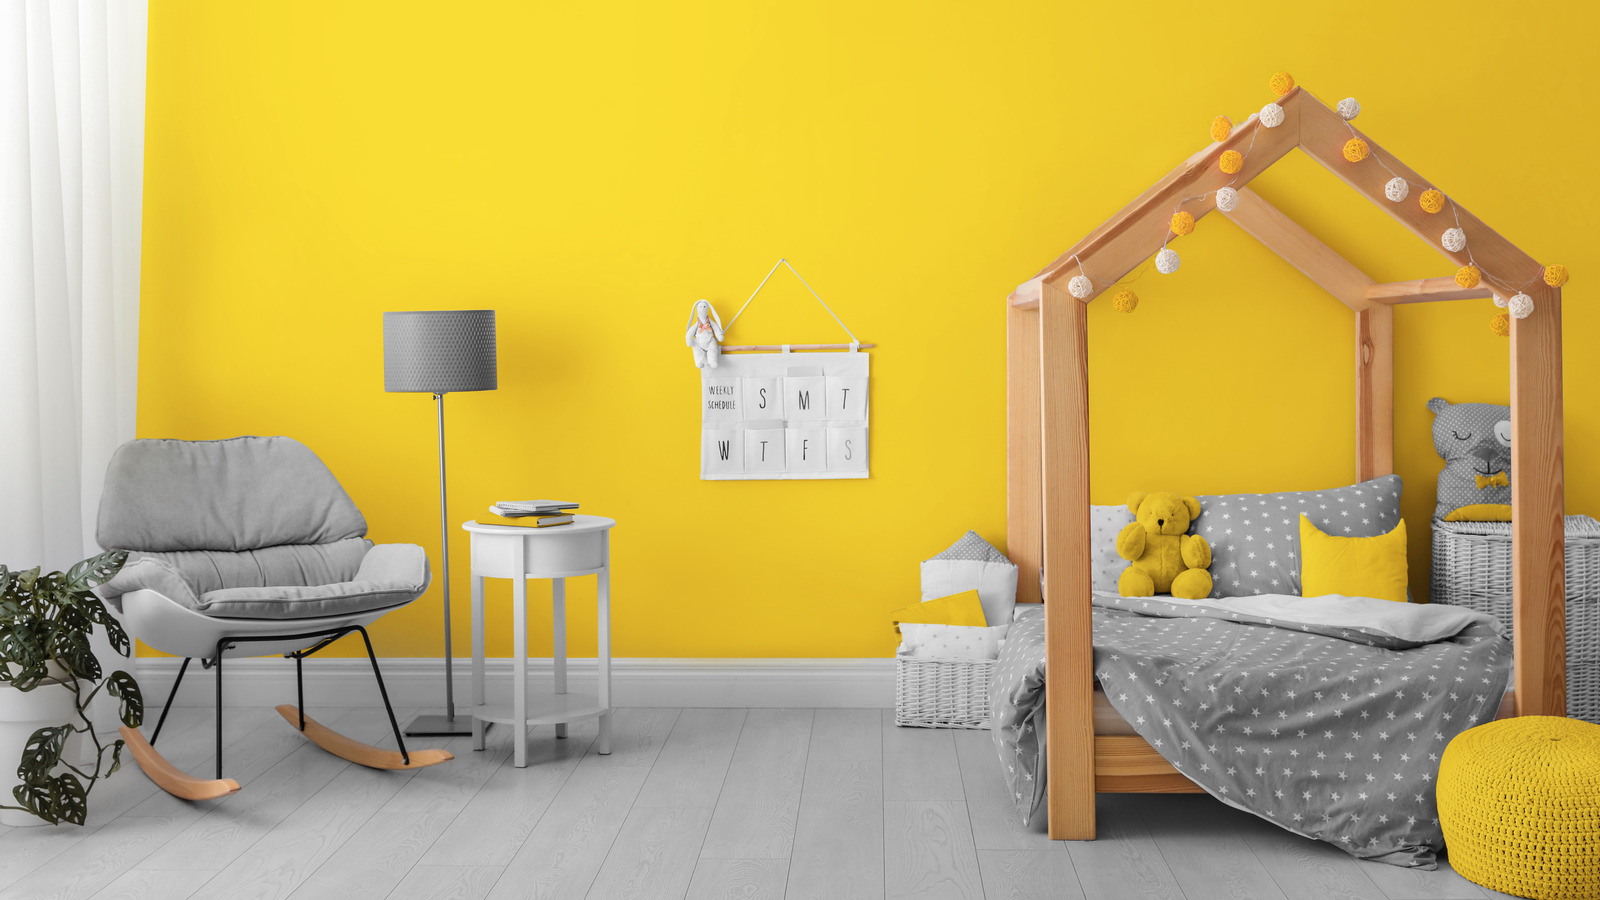 The Best Themes For Kids' Rooms